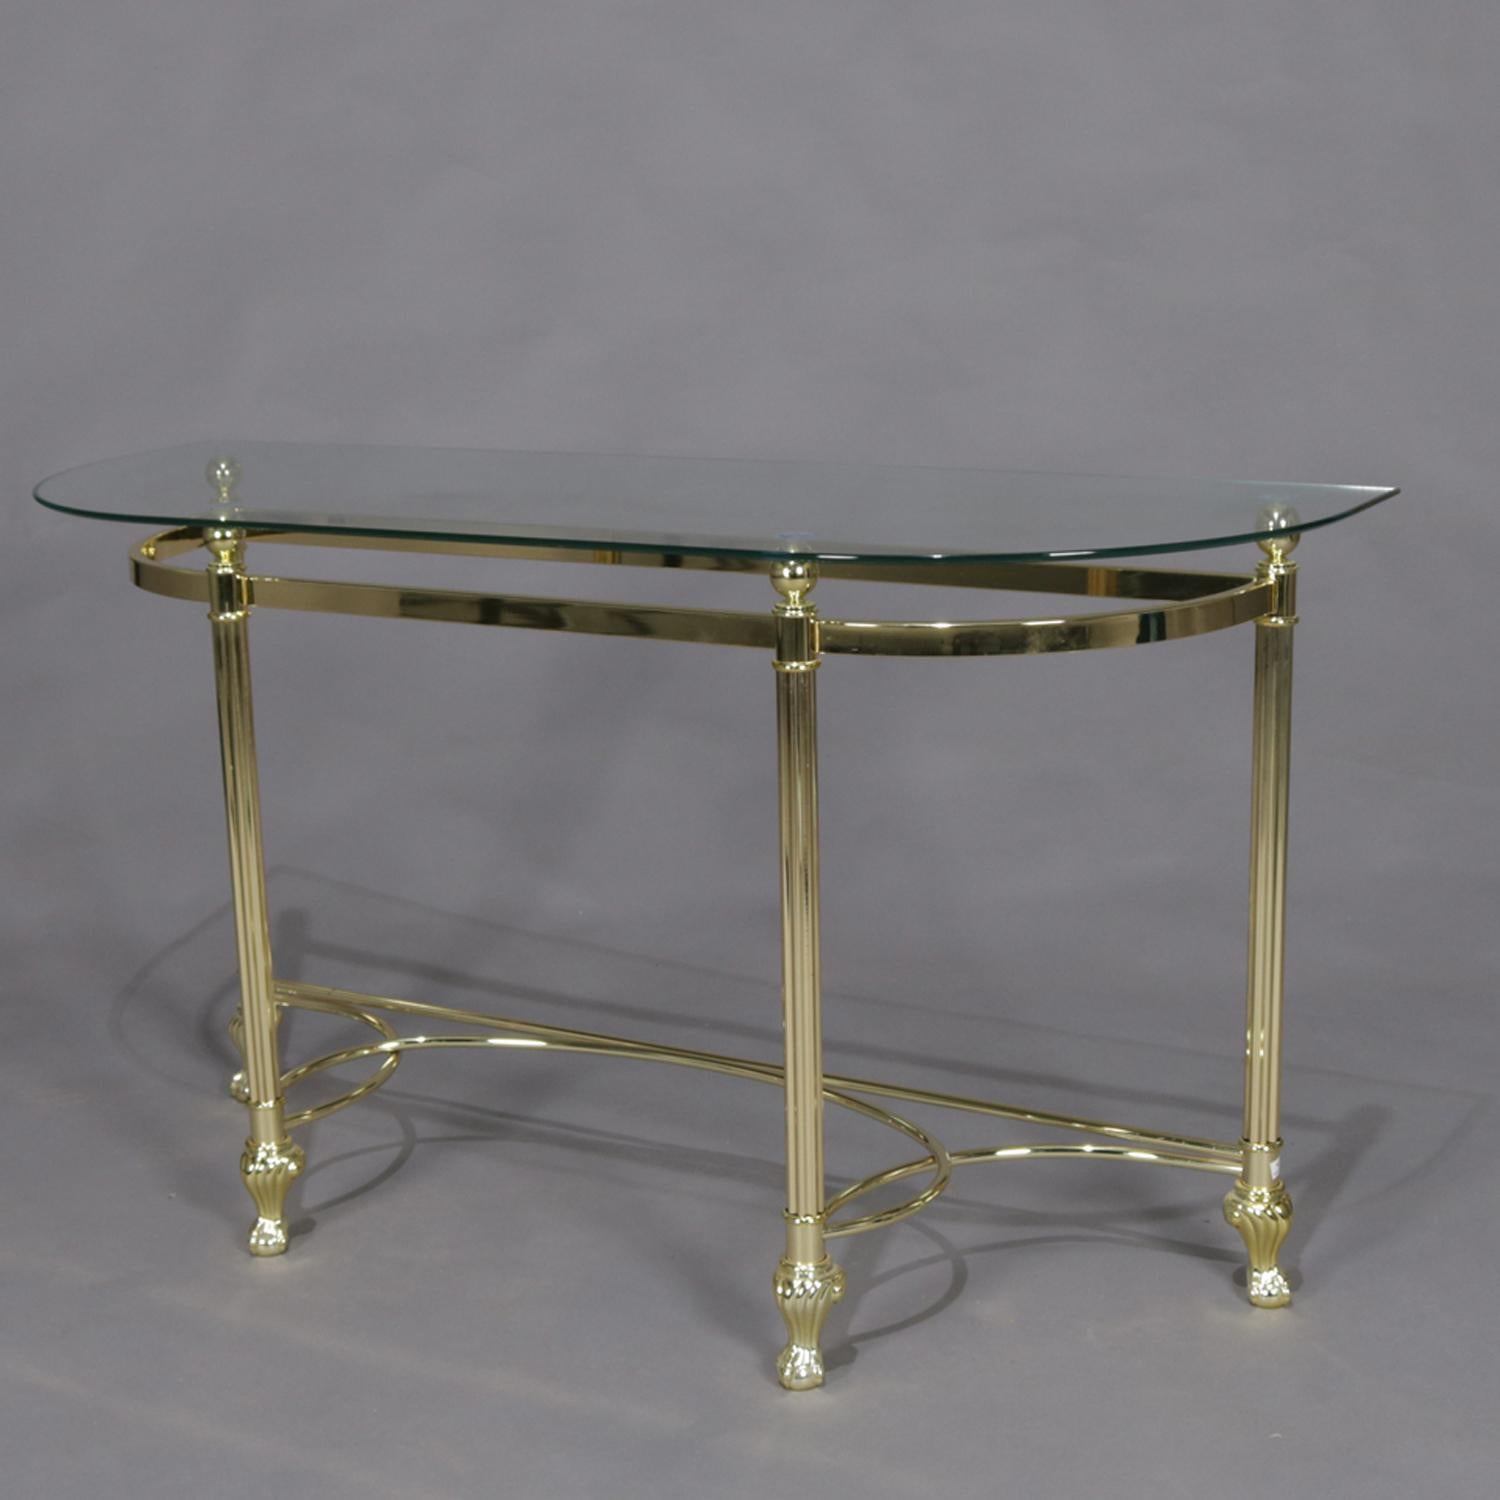 Cast Italian Midcentury Transitional Paw Foot Brass and Glass Console Table